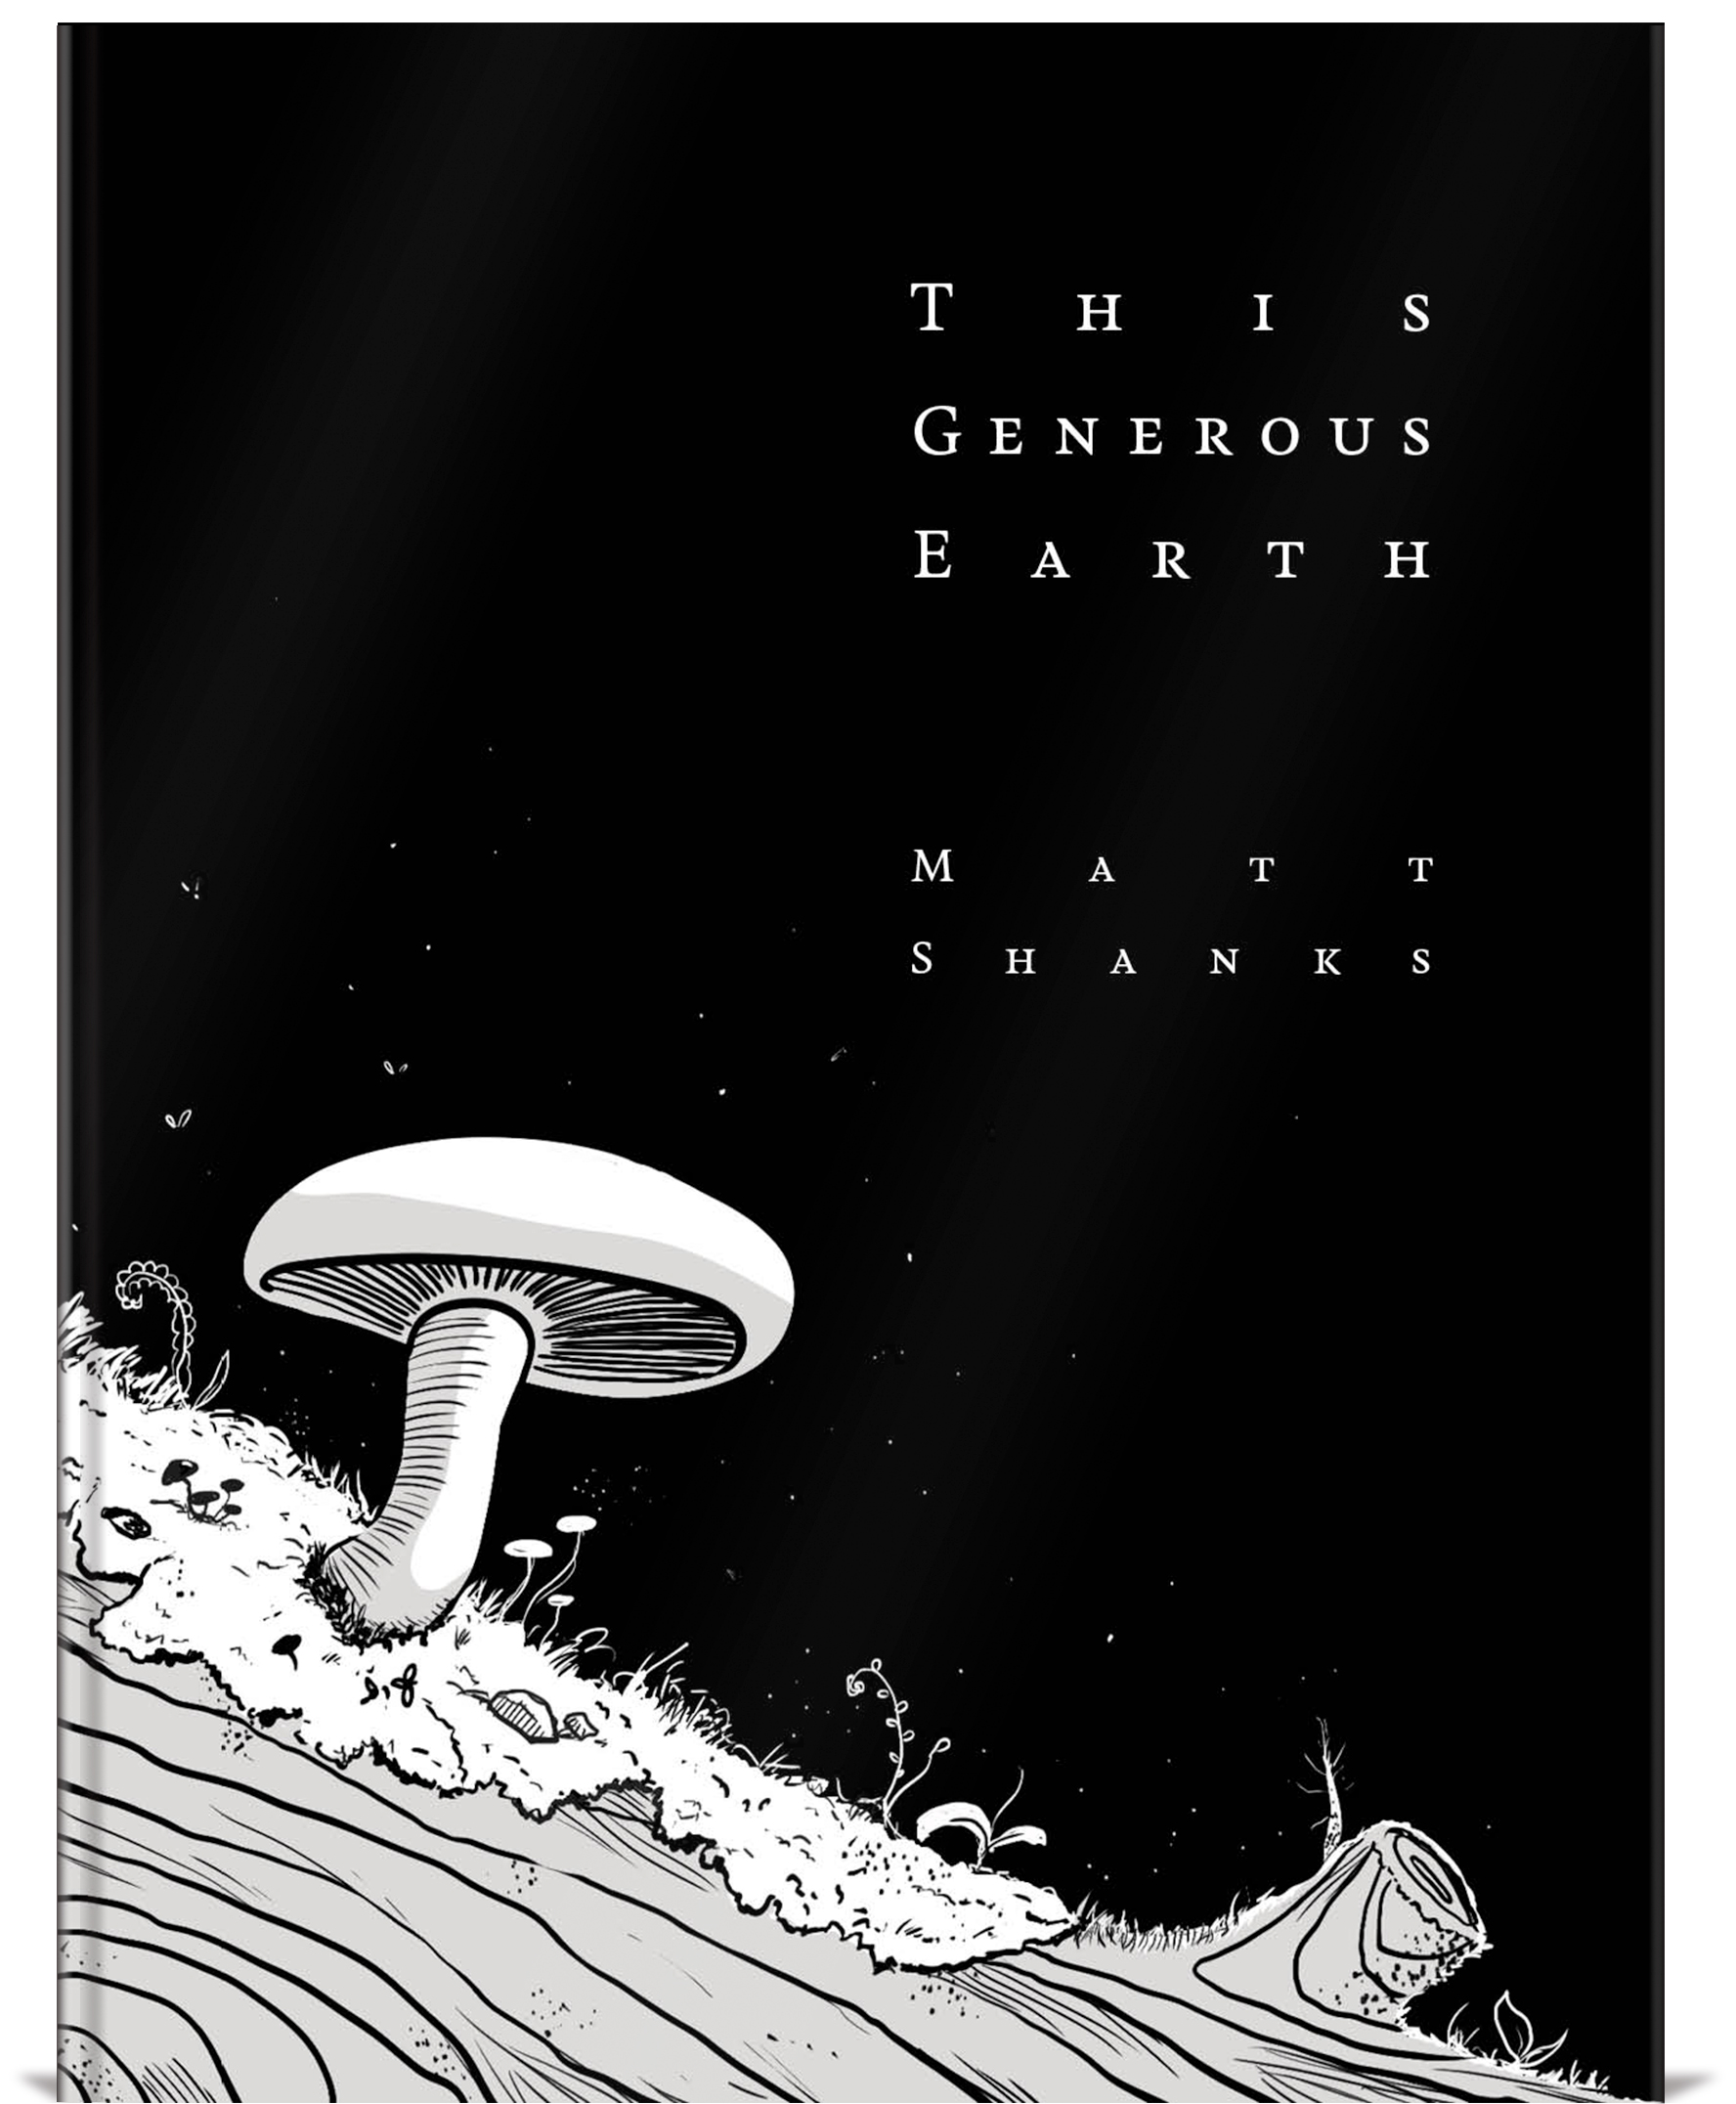 Graphic novel cover: A mushroom and moss growing on a log with the title of the book, This Generous Earth, suspended above